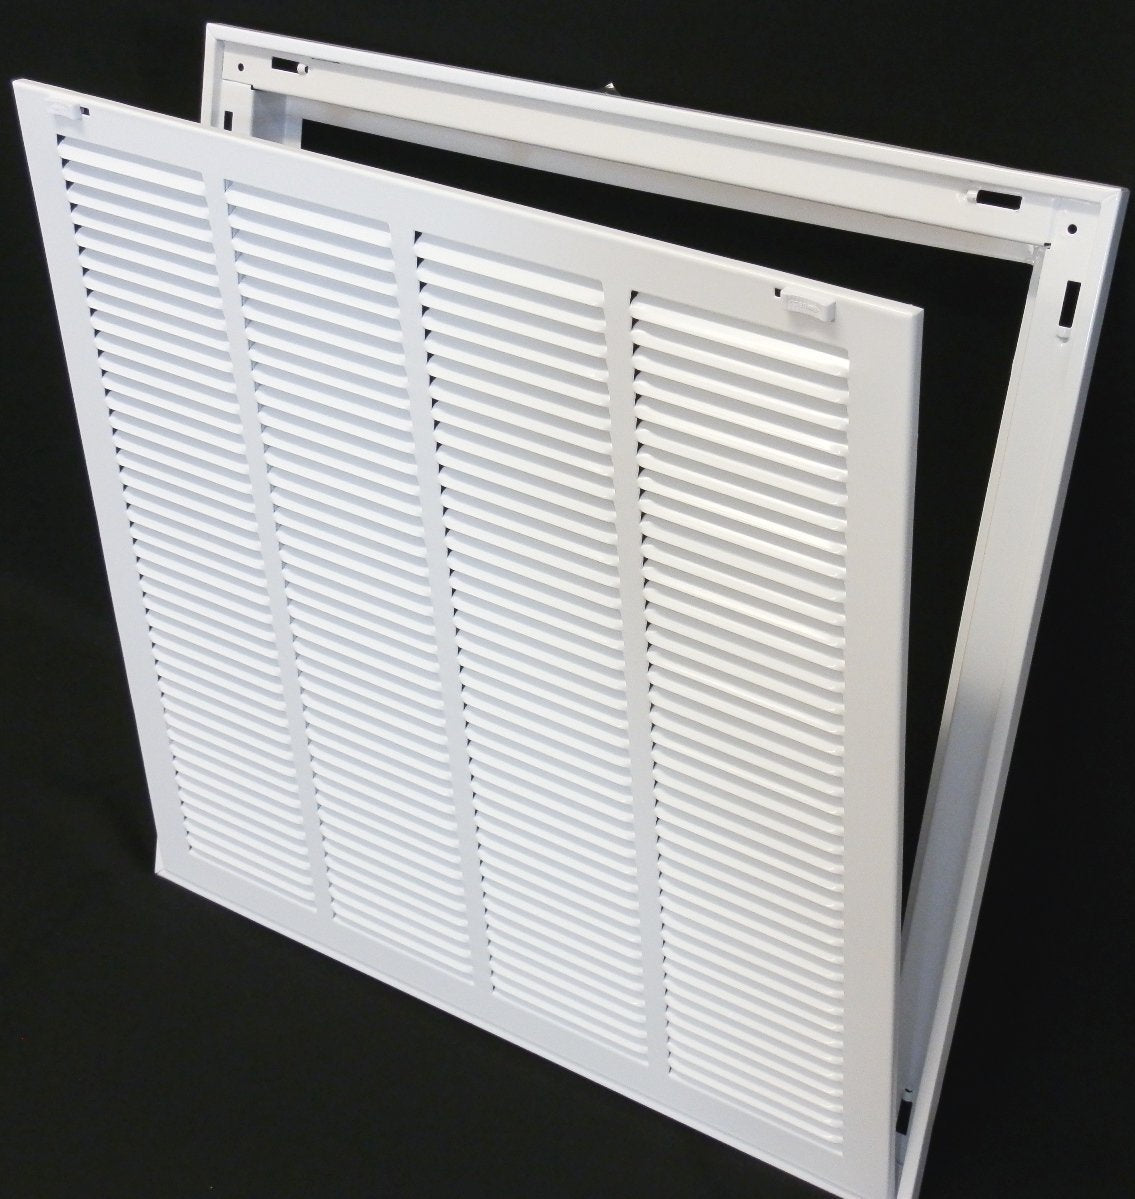 28&quot; X 16&quot; Steel Return Air Filter Grille for 1&quot; Filter - Removable Frame - [Outer Dimensions: 30 5/8&quot; X 18 5/8&quot;]